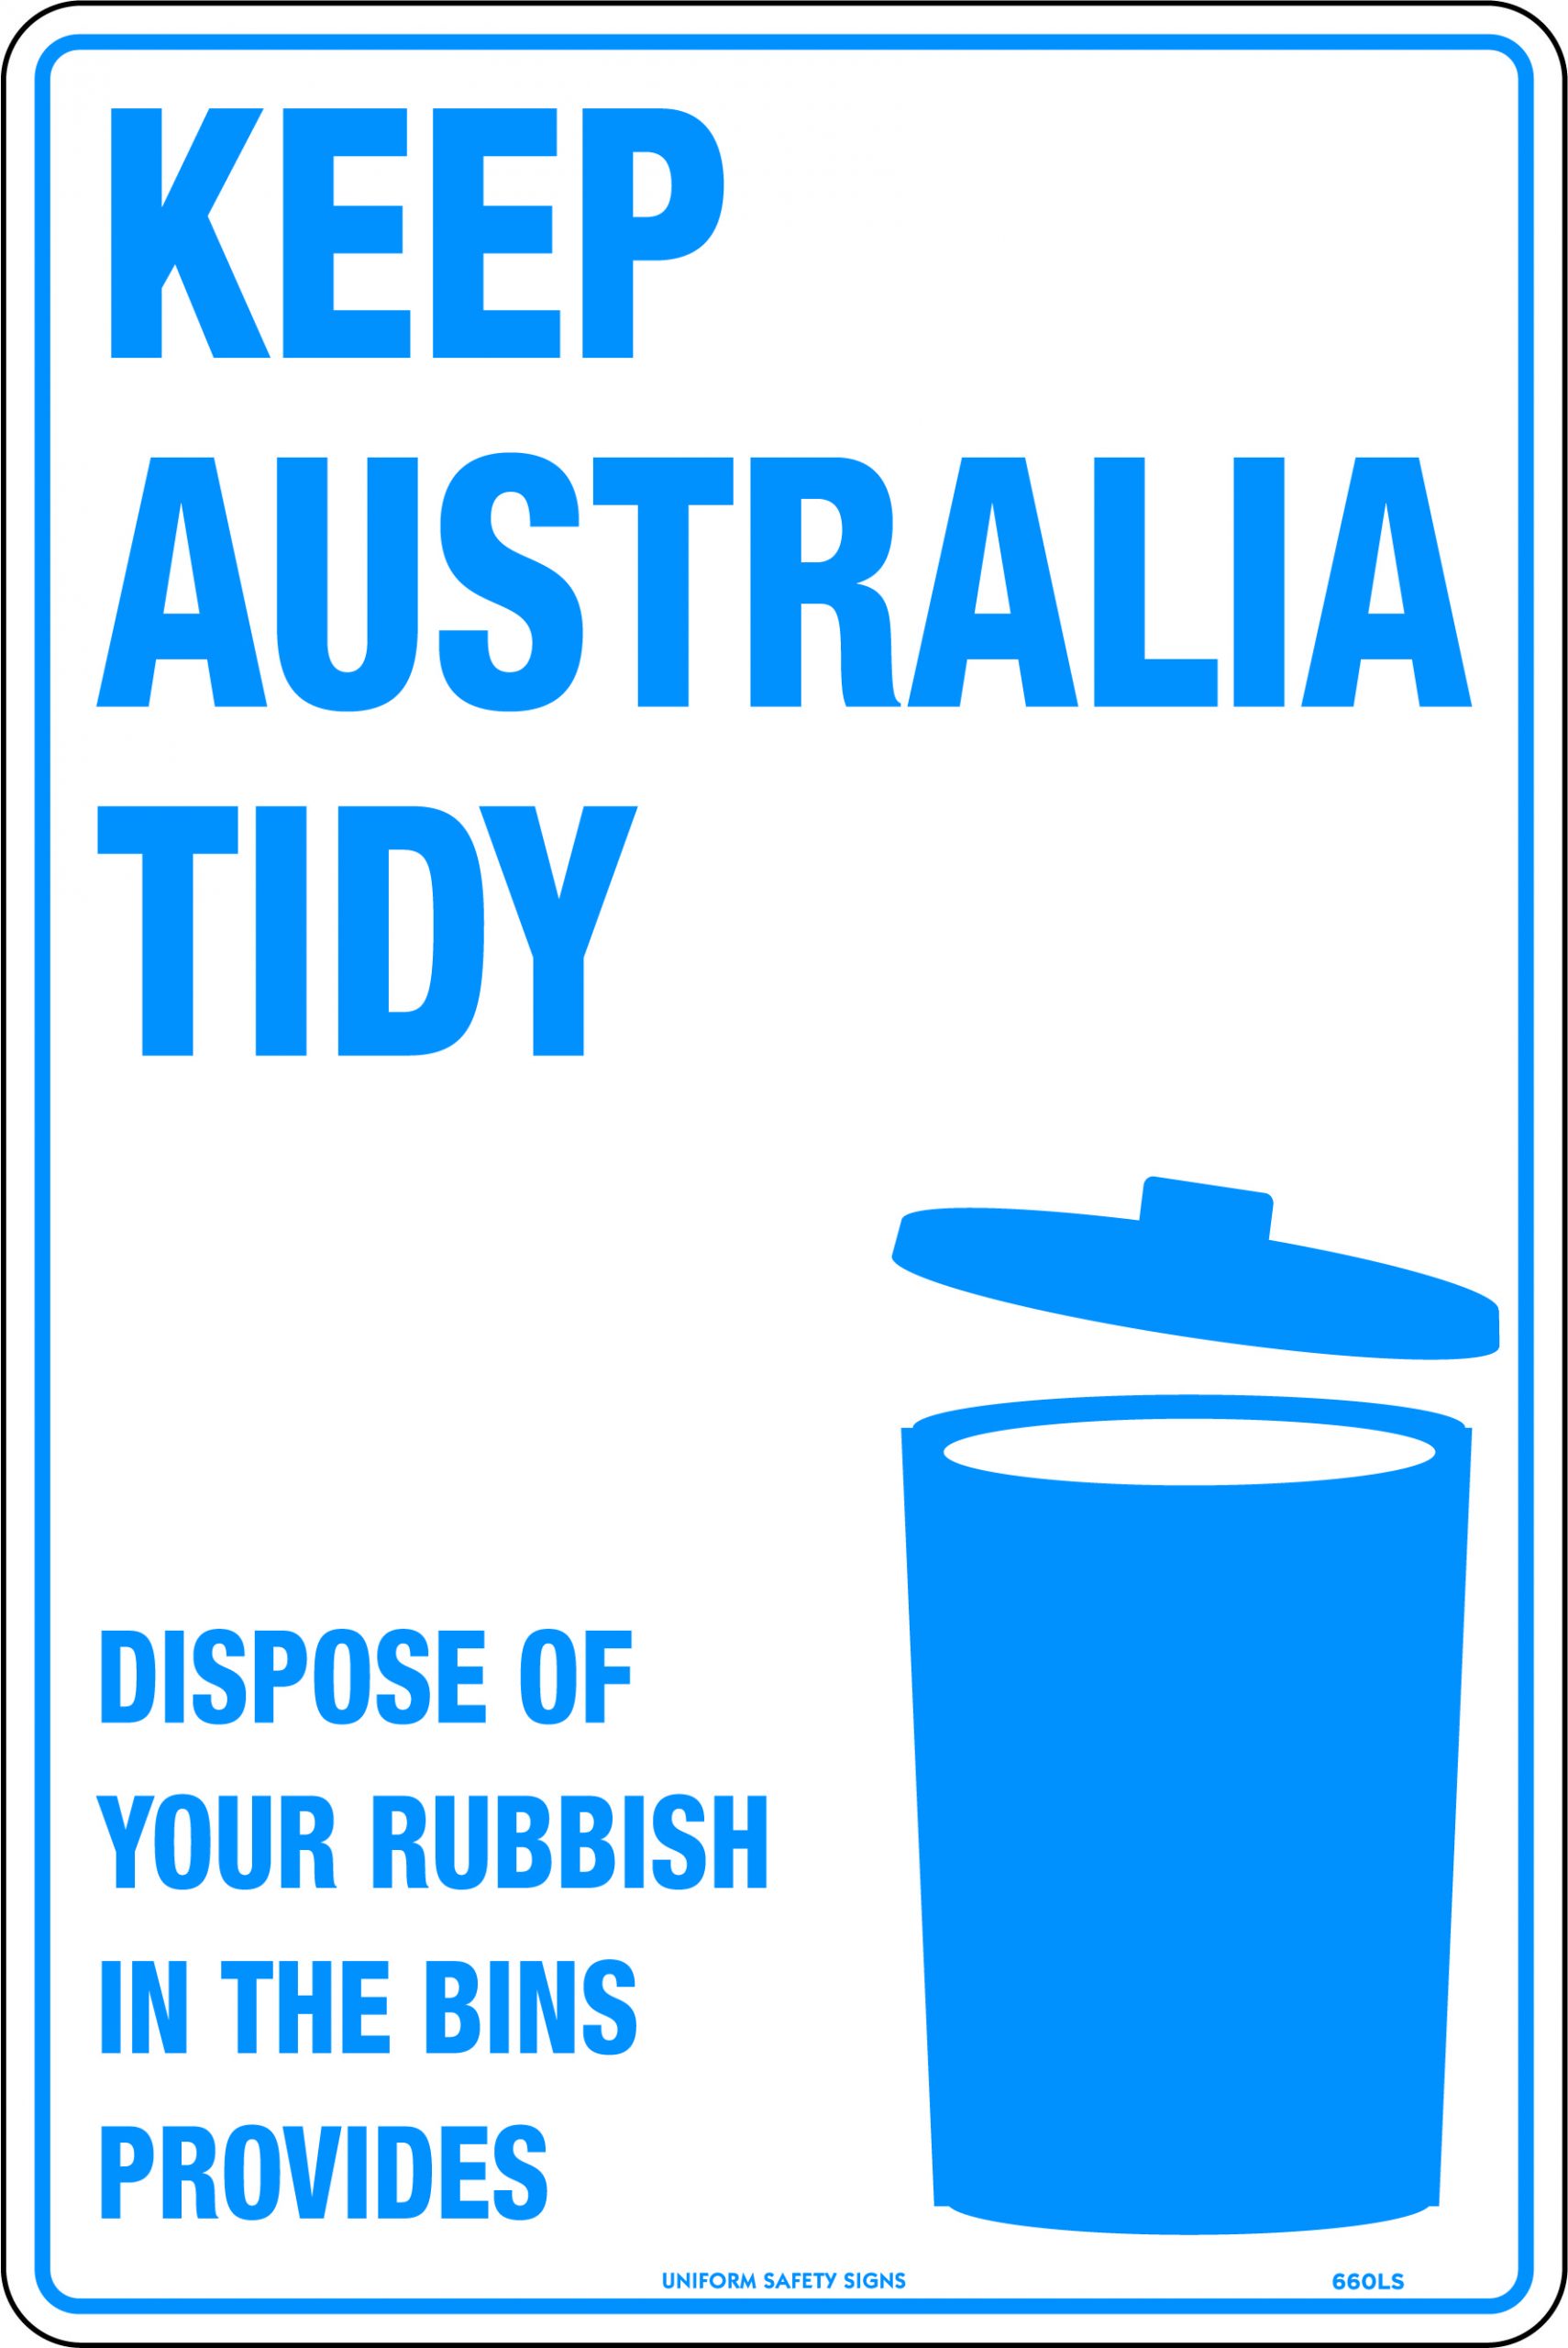 UNIFORM SAFETY 450X300MM POLY KEEP AUSTRALIA TIDY DISPOSE OF YOUR